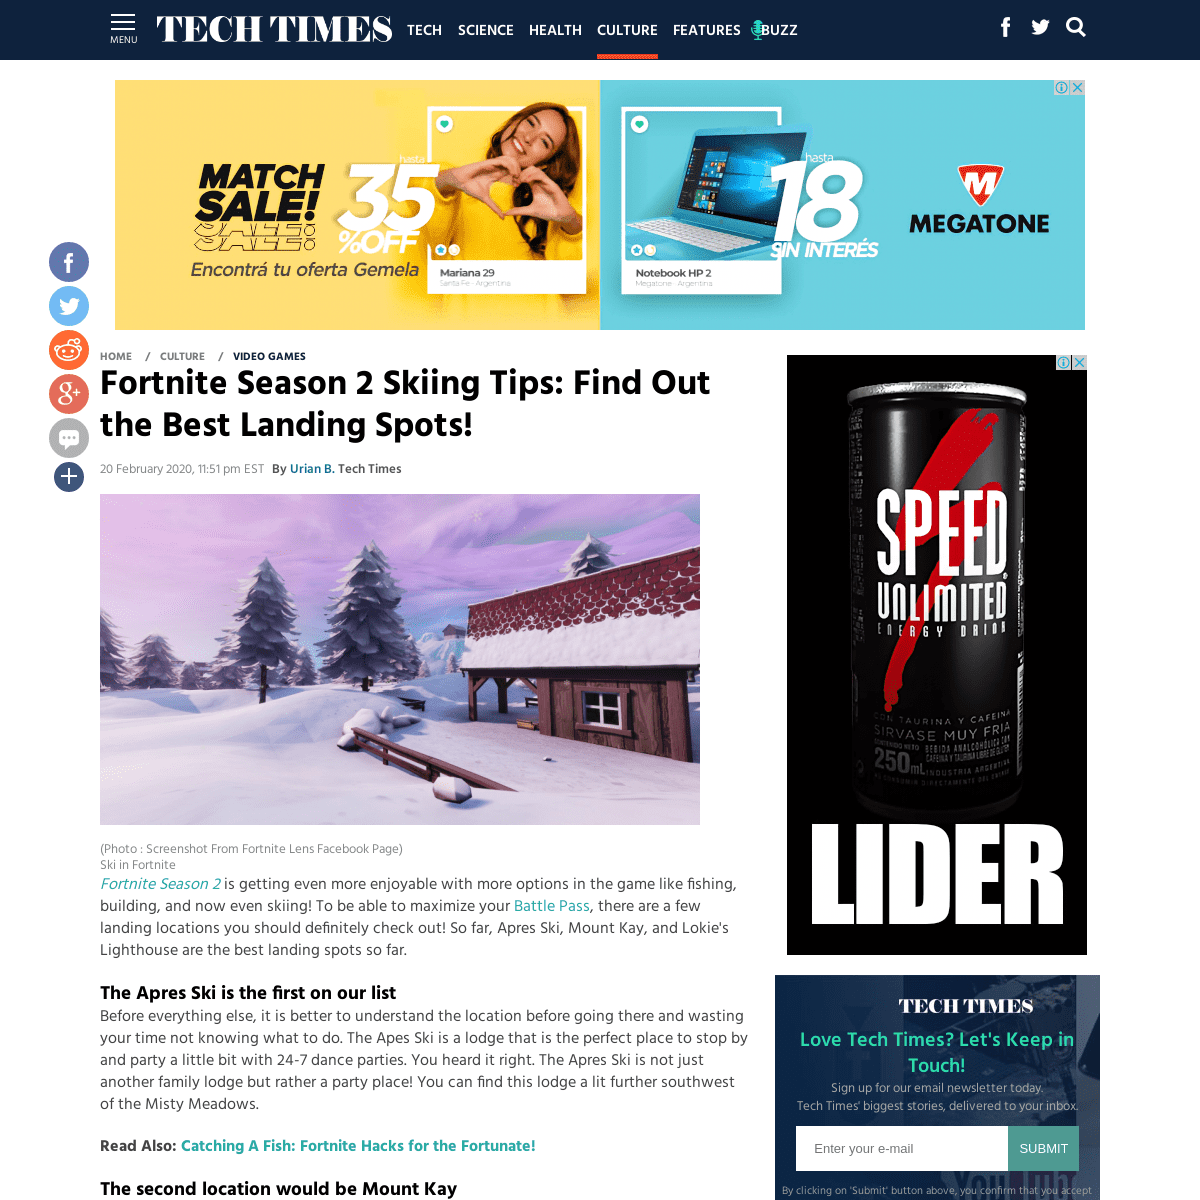 A complete backup of www.techtimes.com/articles/247488/20200220/fortnite-season-2-ski-tips-find-out-the-best-landing-spots.htm